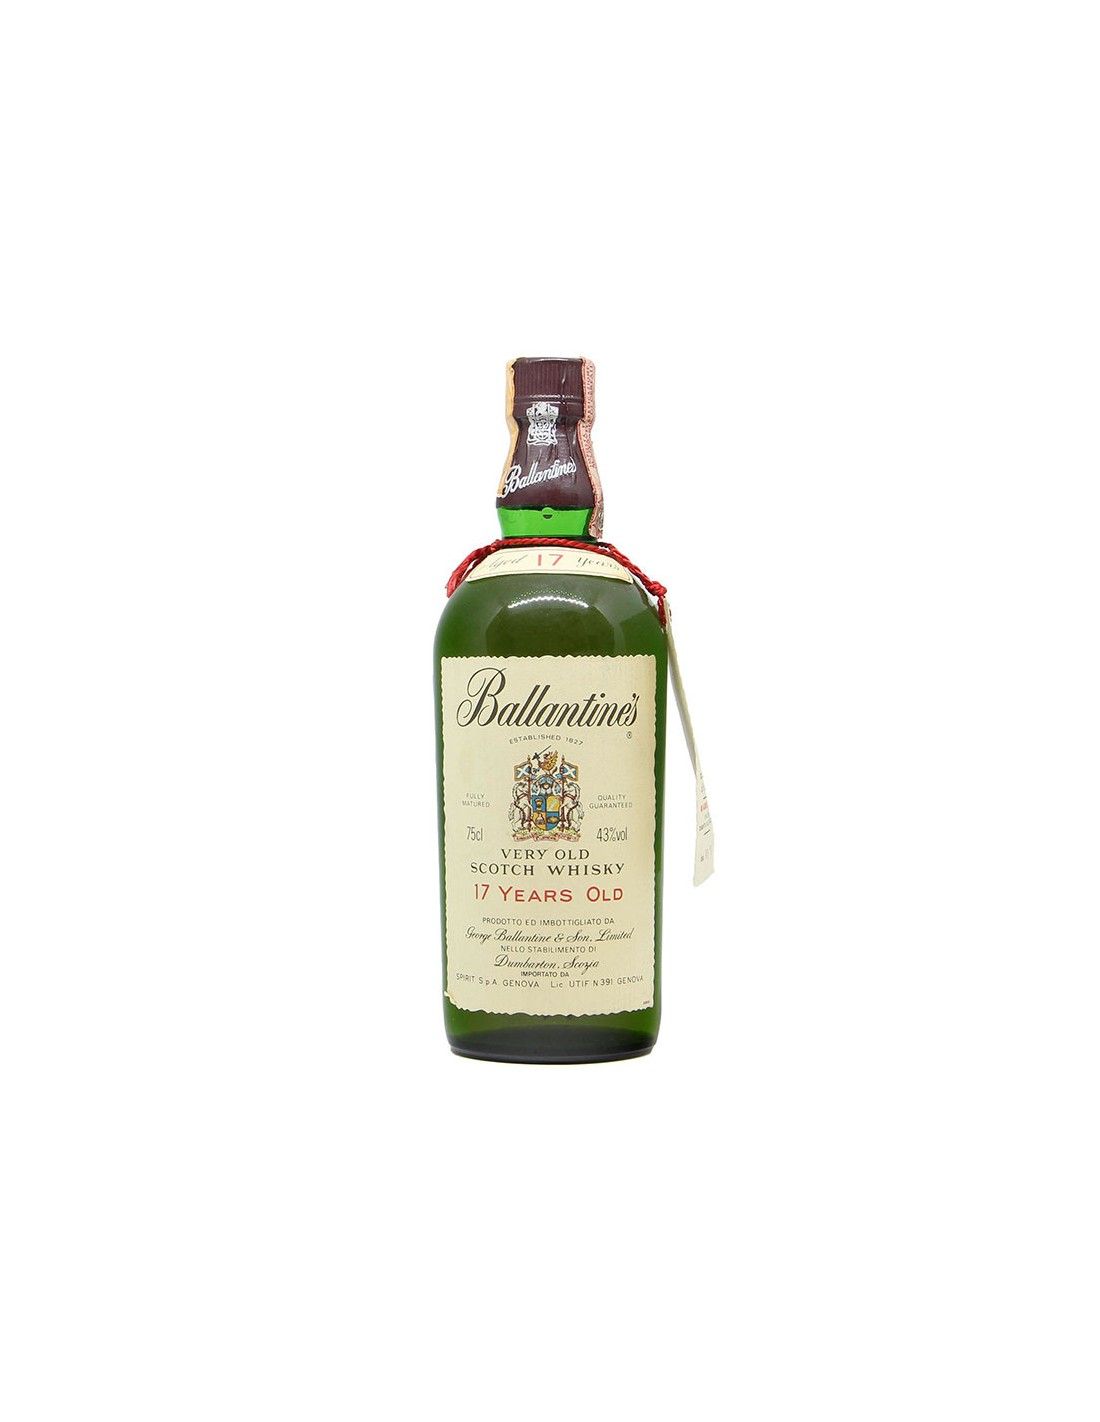 BALLANTINE'S VERY OLD SCOTCH WHISKY 17 YEARS OLD MATURED IN OAK CASK 43 1971 GEORGE BALLANTINE